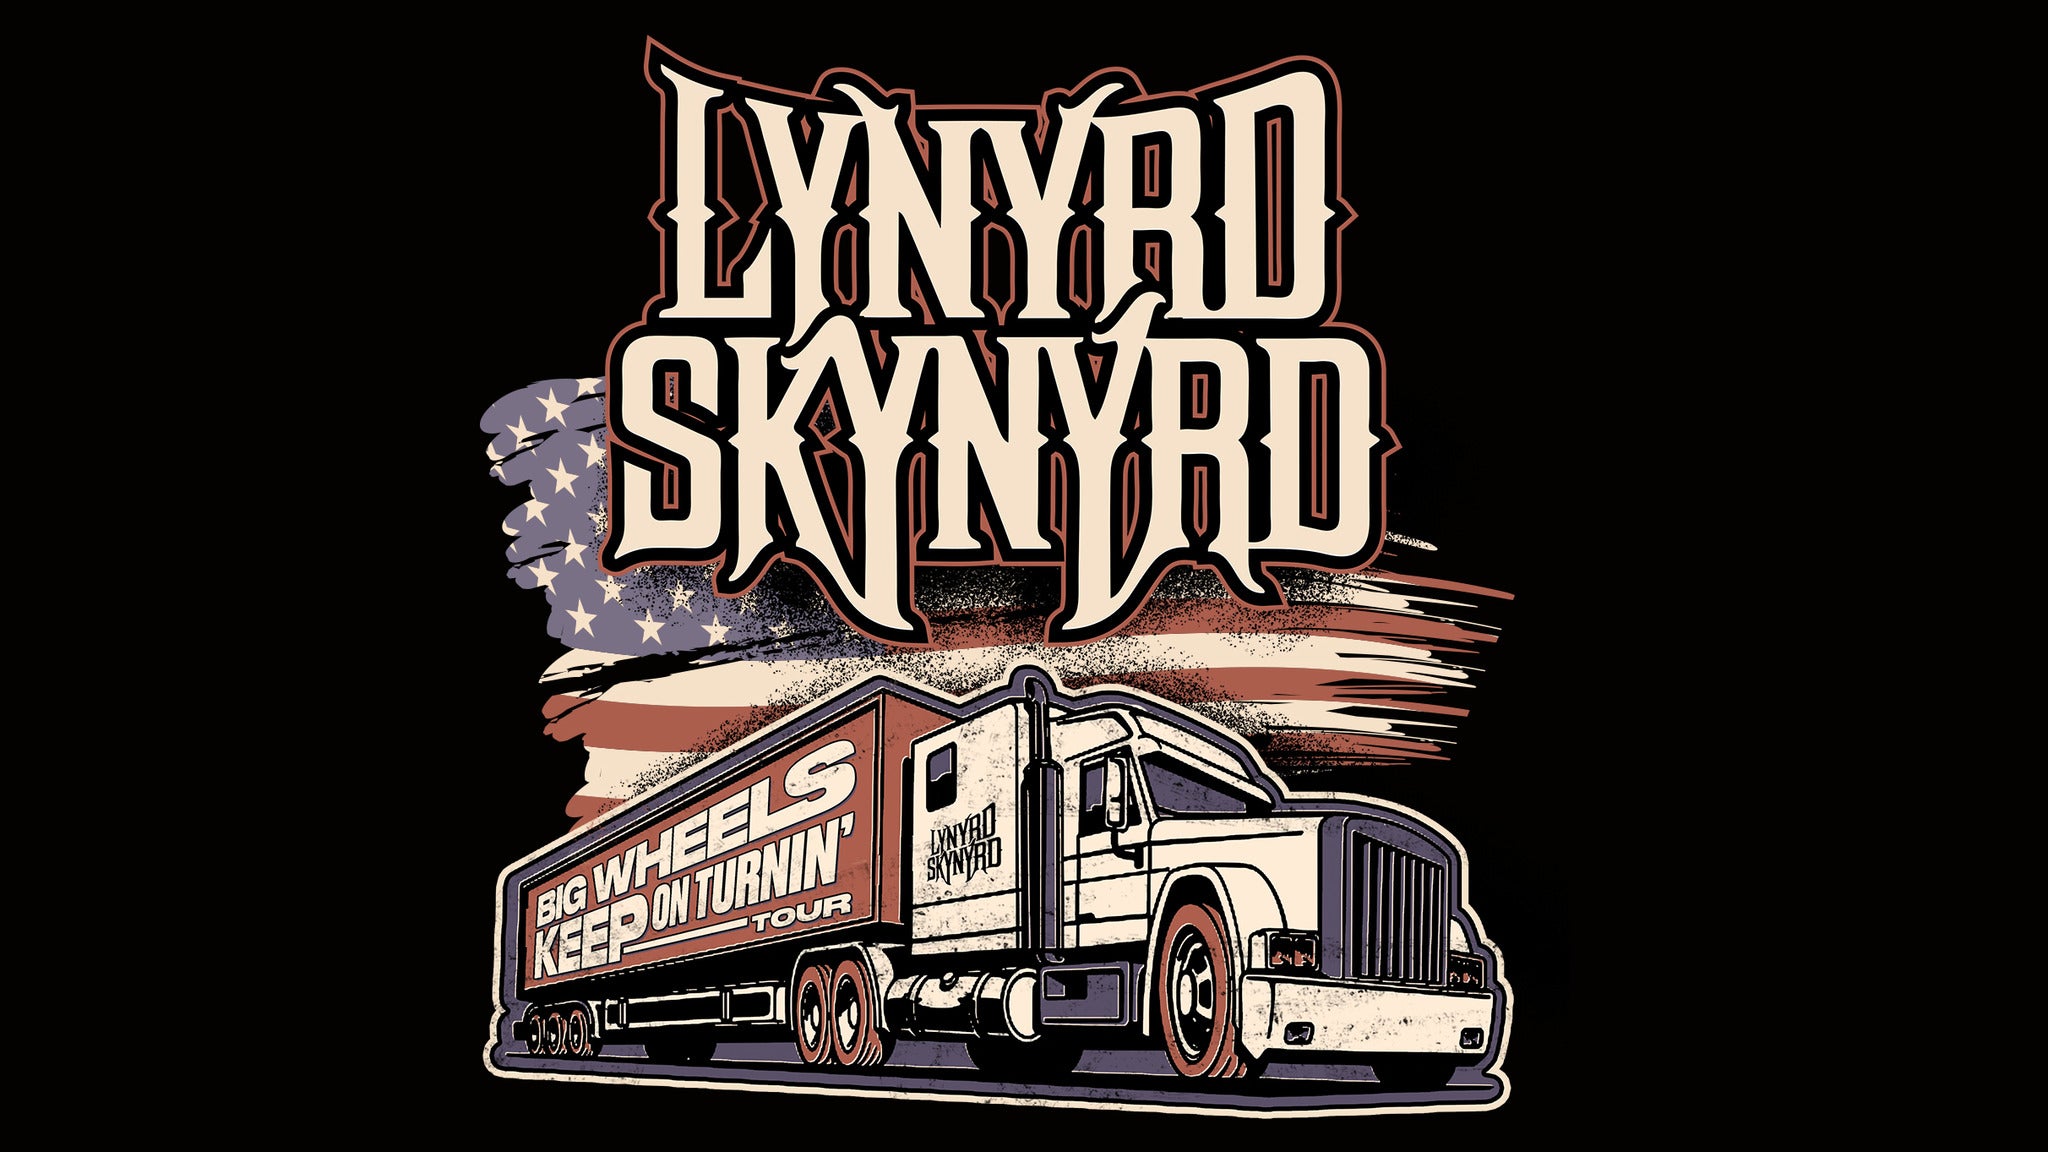 Lynryd Skynyrd - Big Wheels Keep On Turnin' Tour presale passcode for early tickets in Gilford